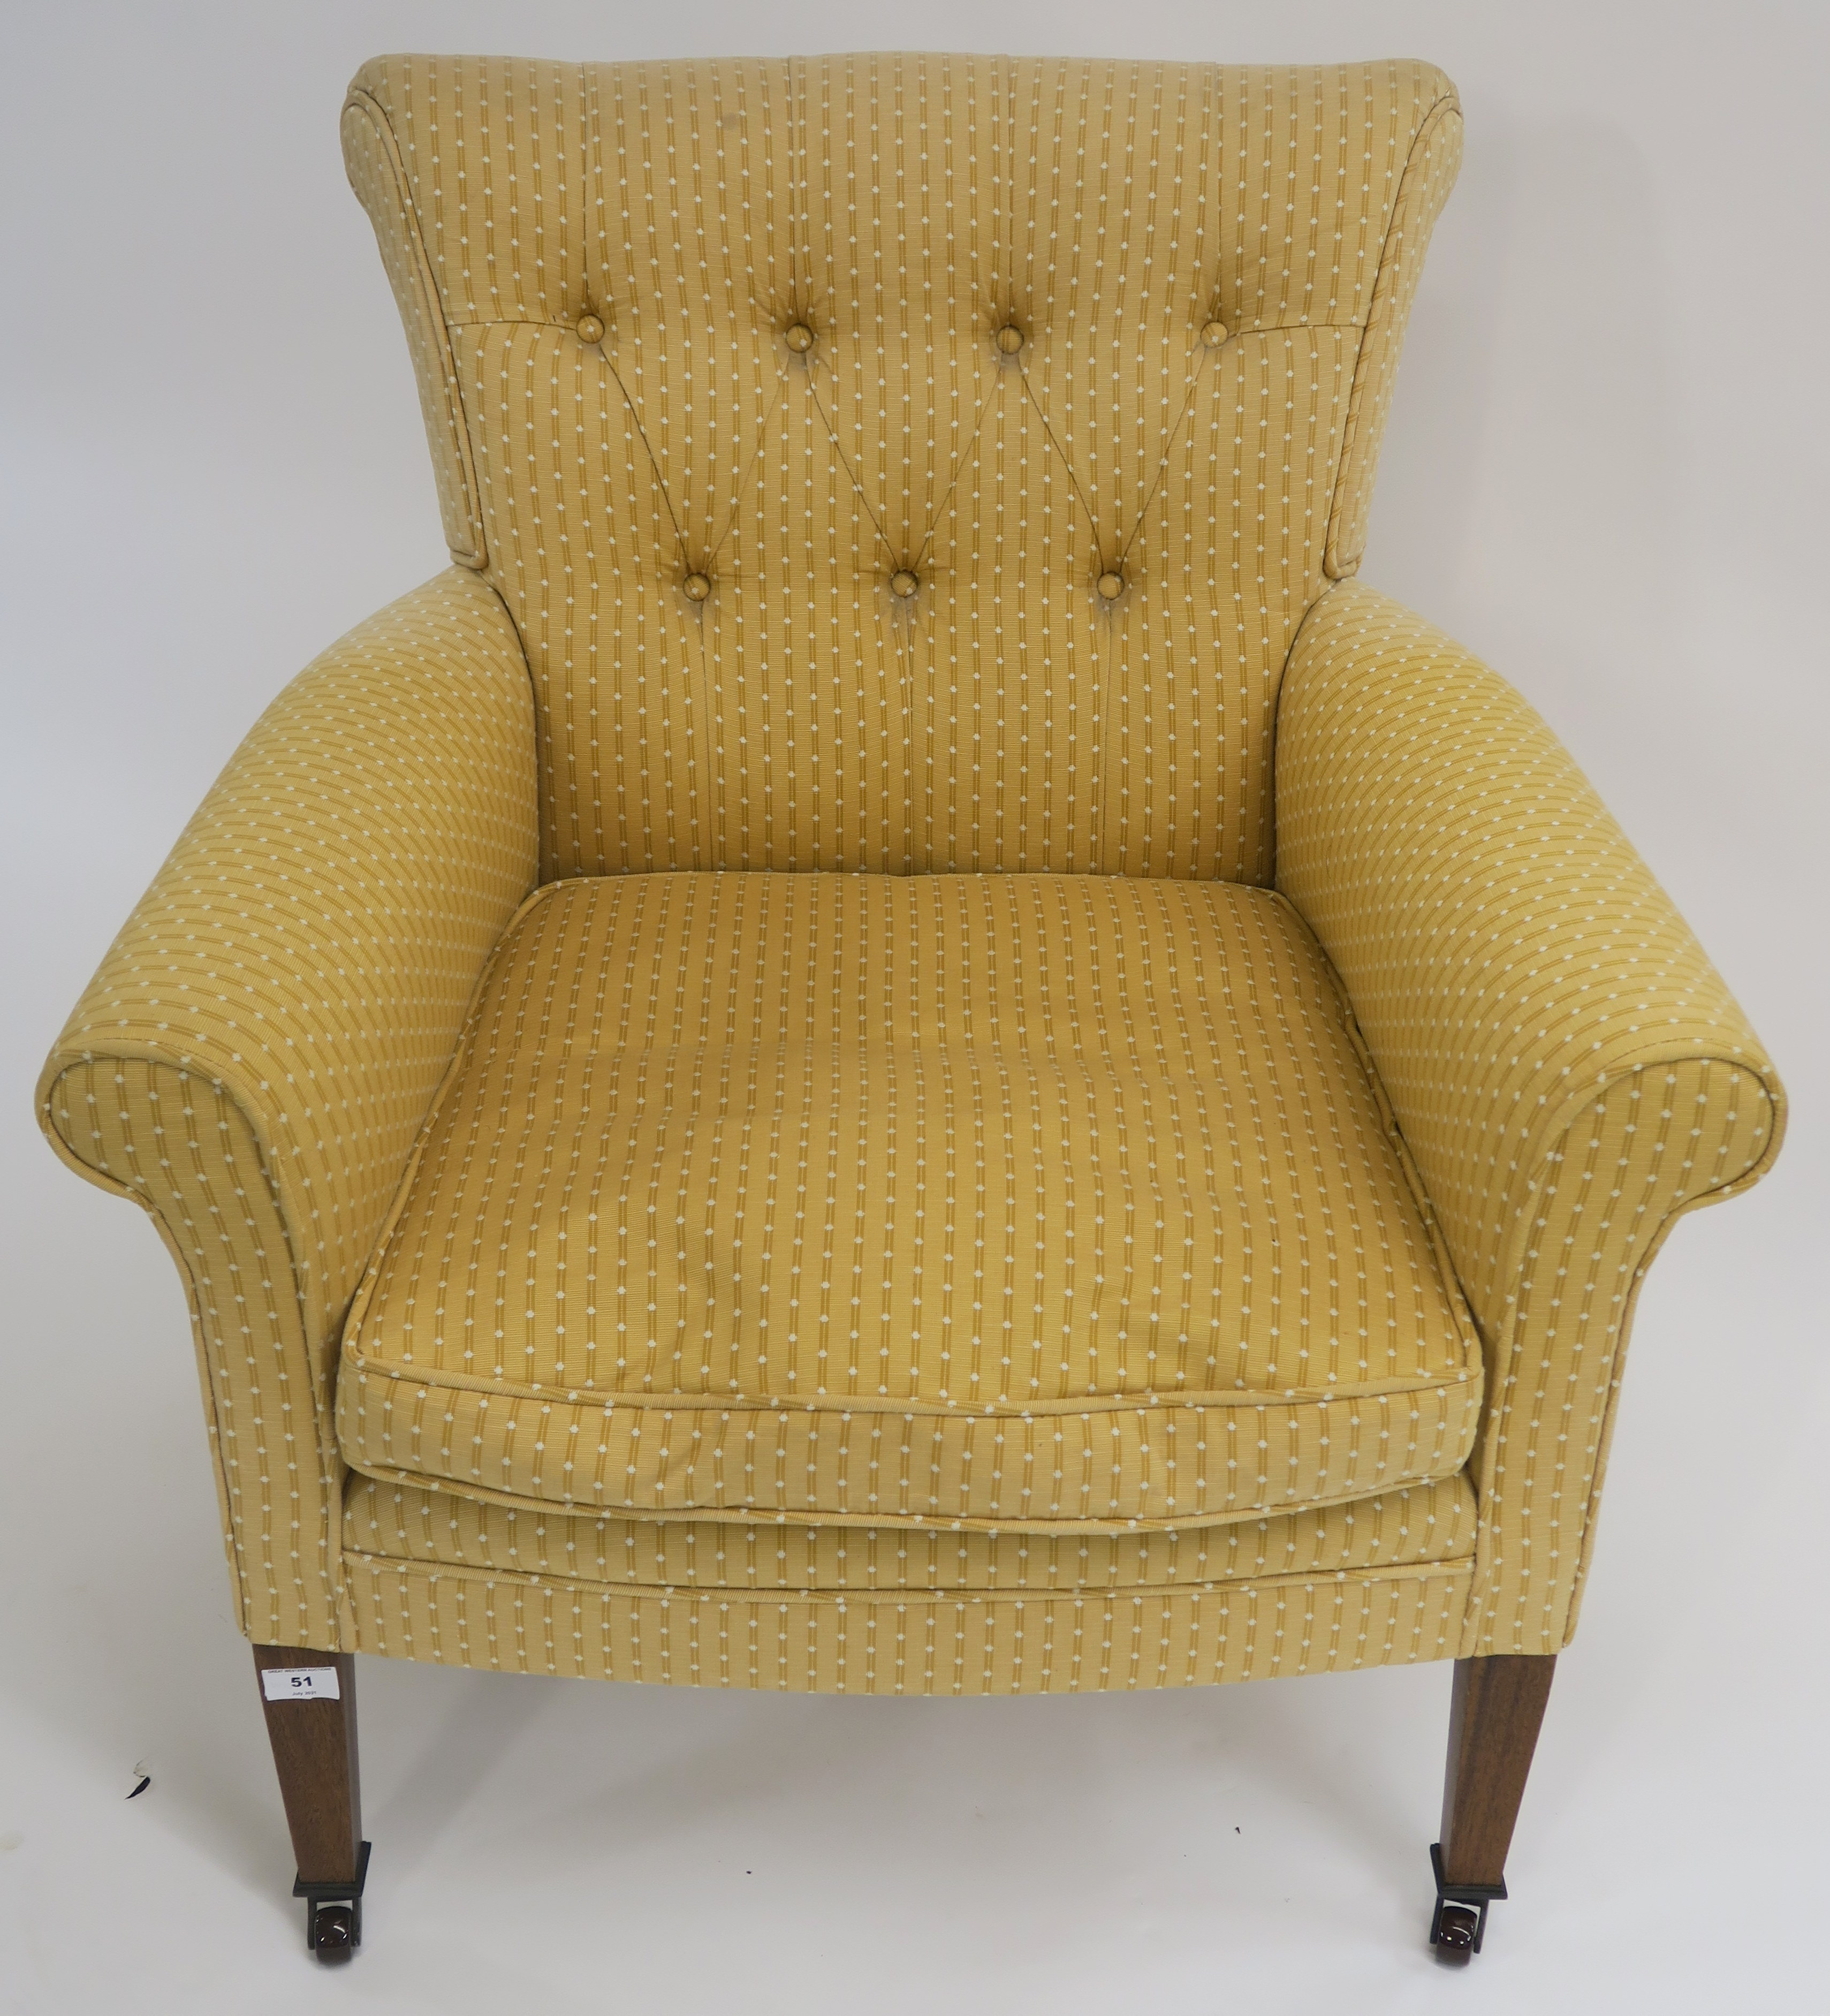 A yellow button back upholstered armchair with square tapering legs on ceramic castors, 84cm high - Image 2 of 2